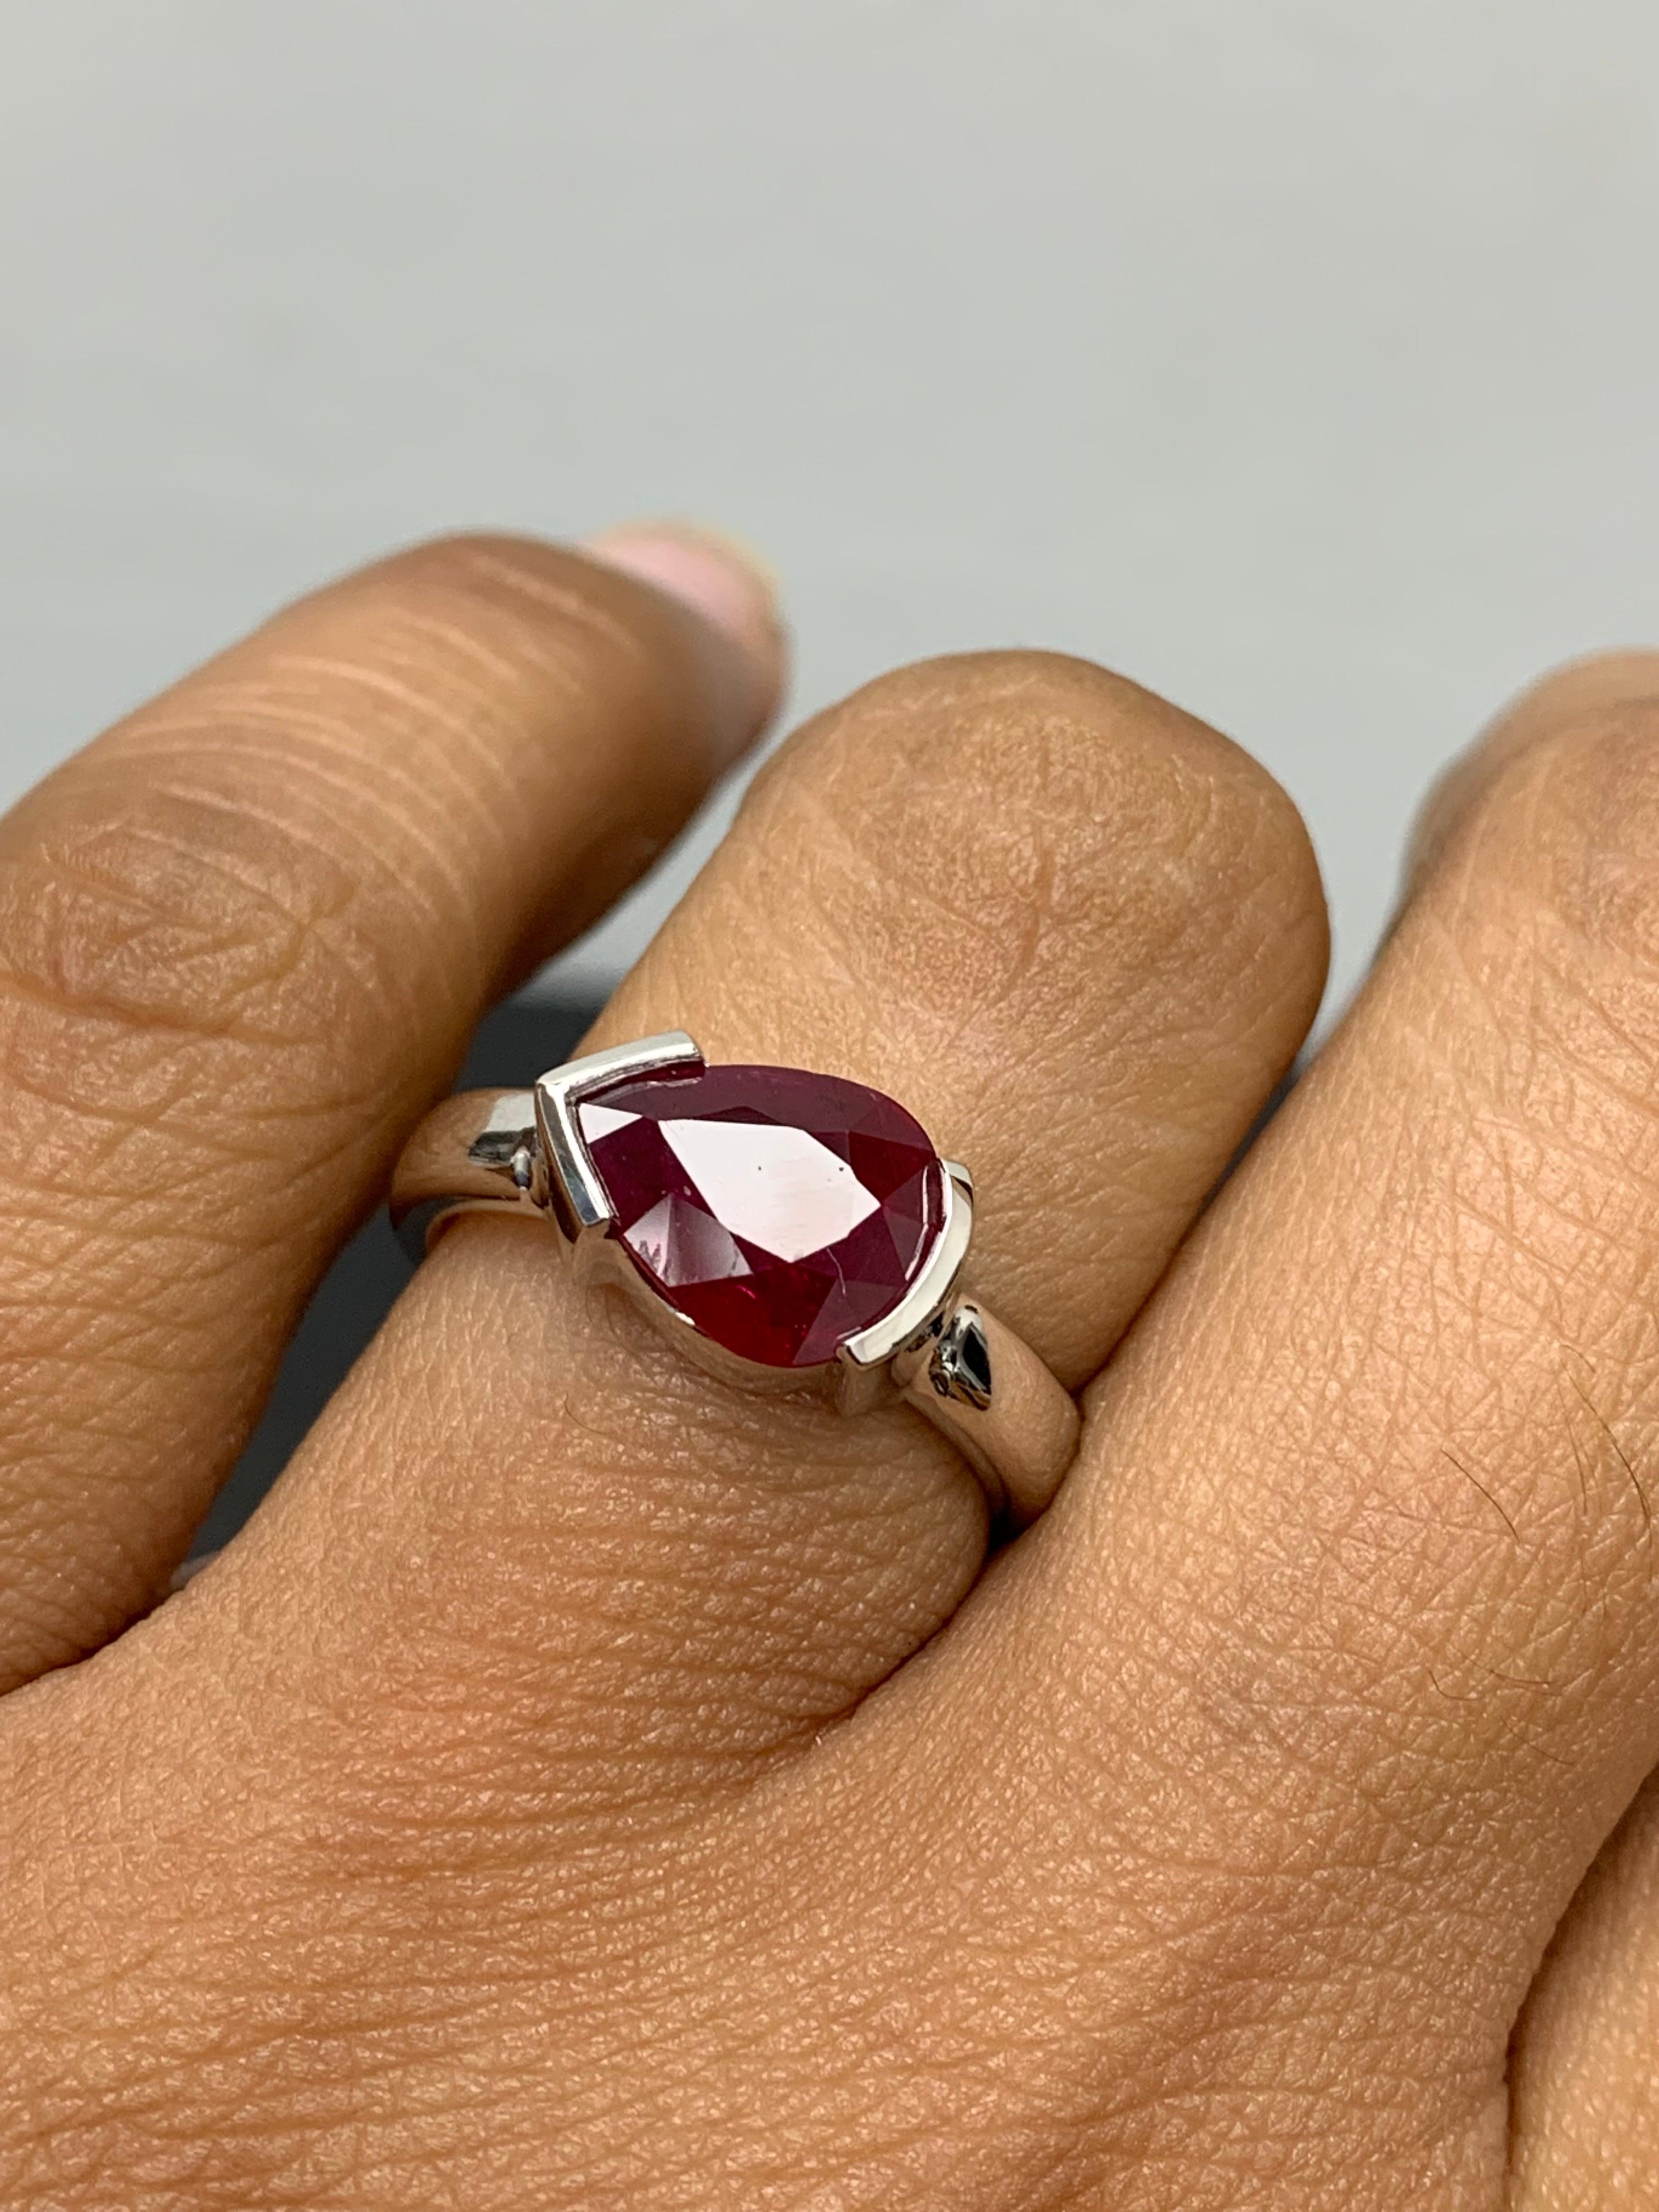 A stunning well-crafted engagement ring showcasing a 1.85-carat pear shape Ruby. Set in a polished 14K White Gold mounting. Handcrafted in our New York City workshop. 

Style is available in different price ranges. Prices are based on your